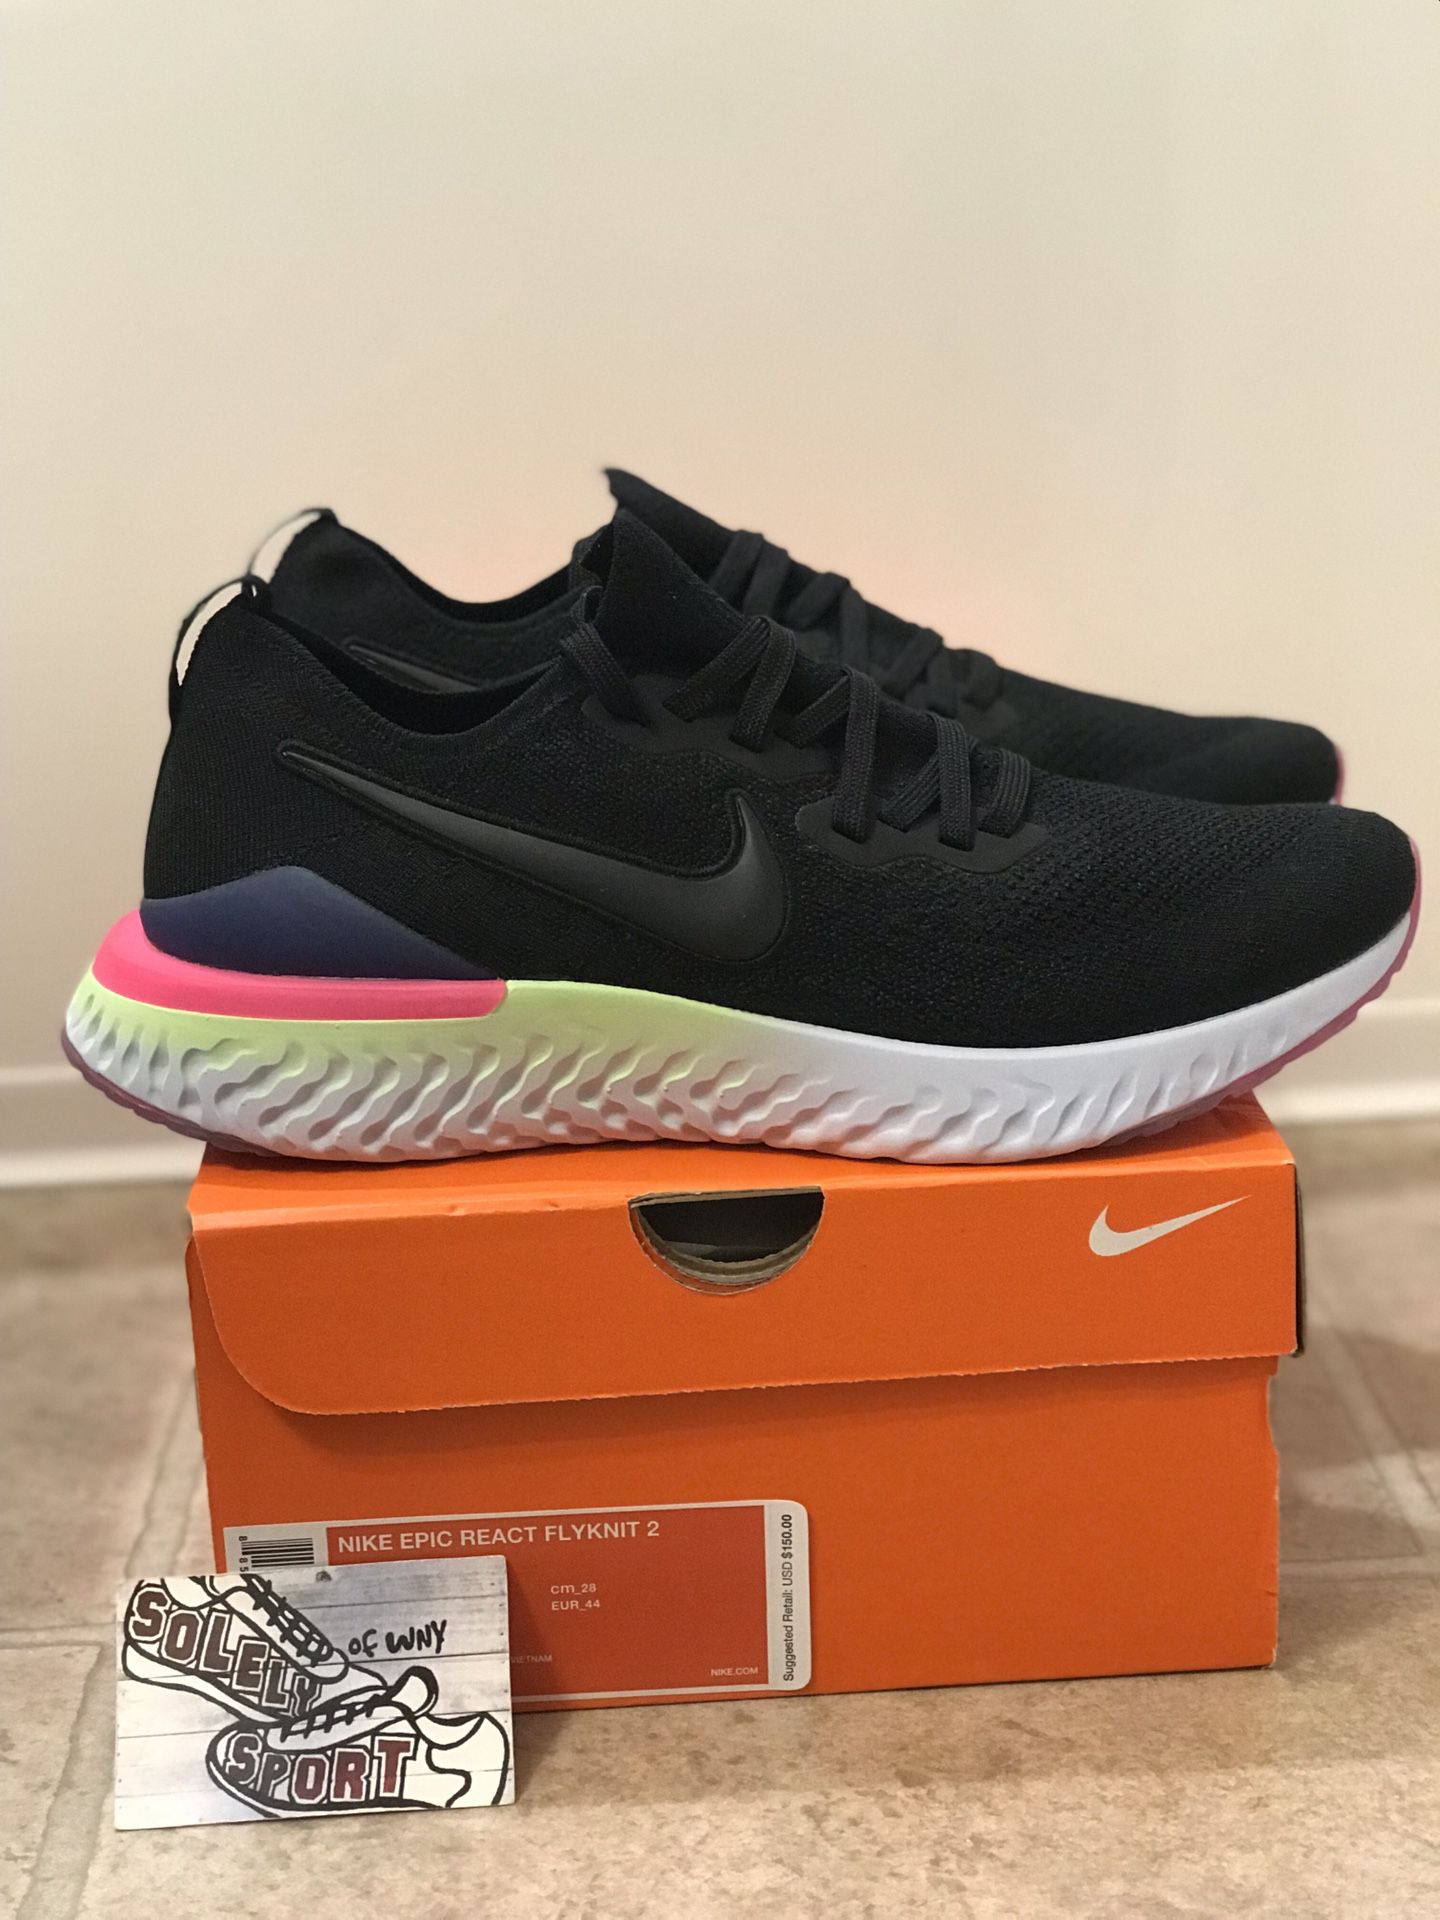 New Nike Epic React Flyknit 2 Running Shoes